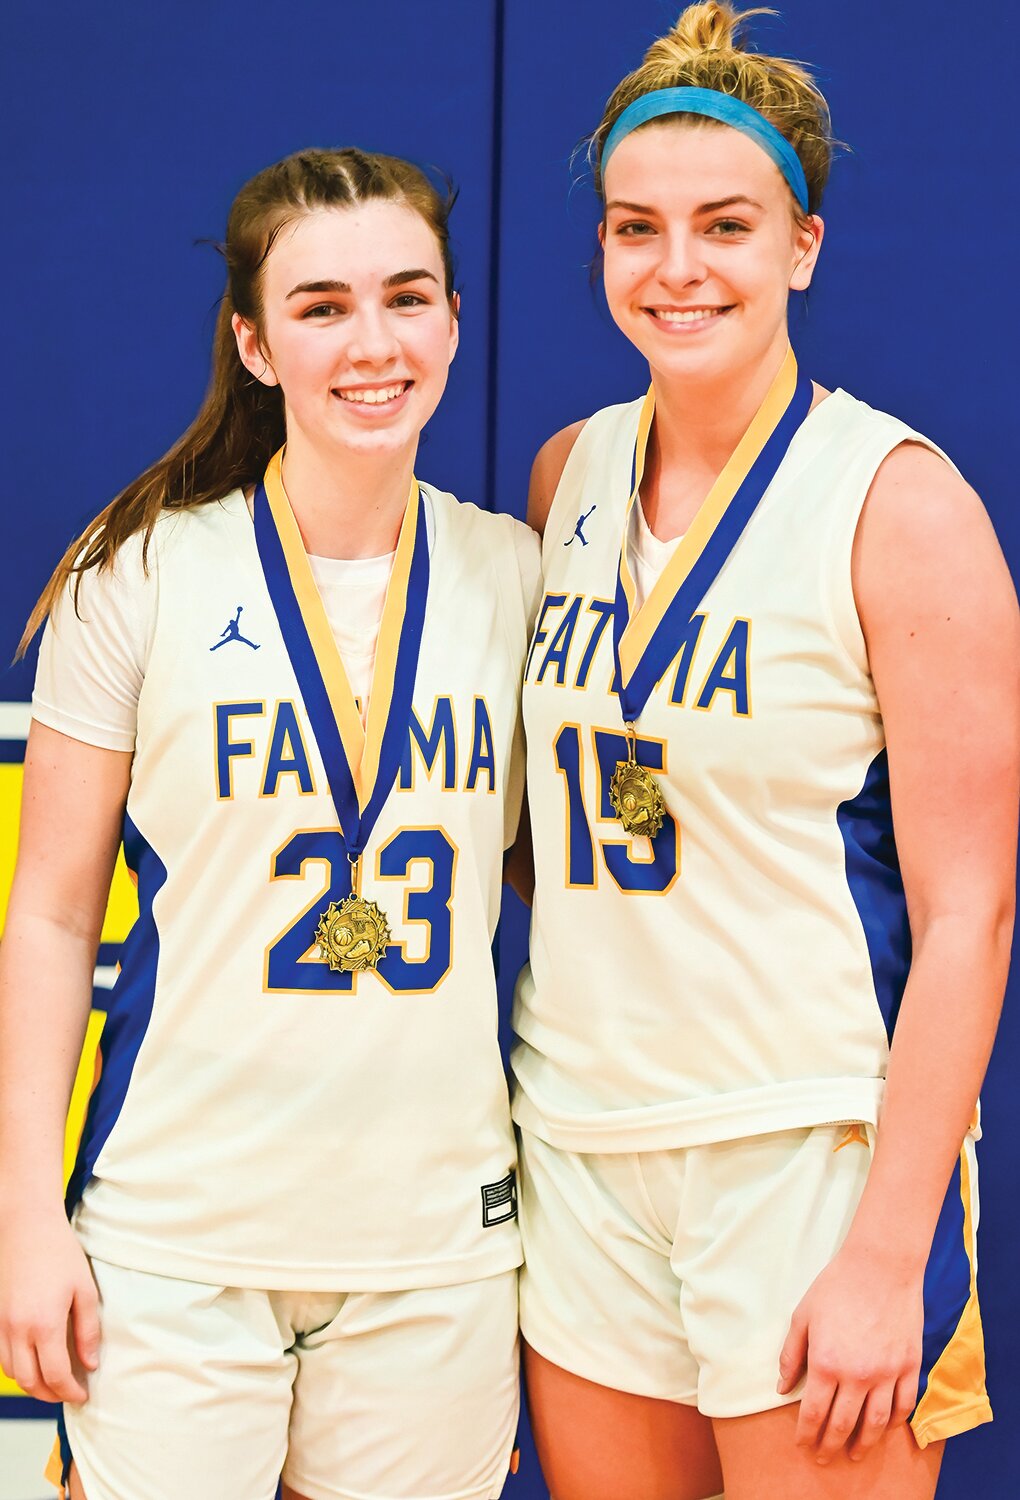 Earning Comet Classic All-Tournament Team honors were Vivian Bax and Alli Robertson of Fatima.